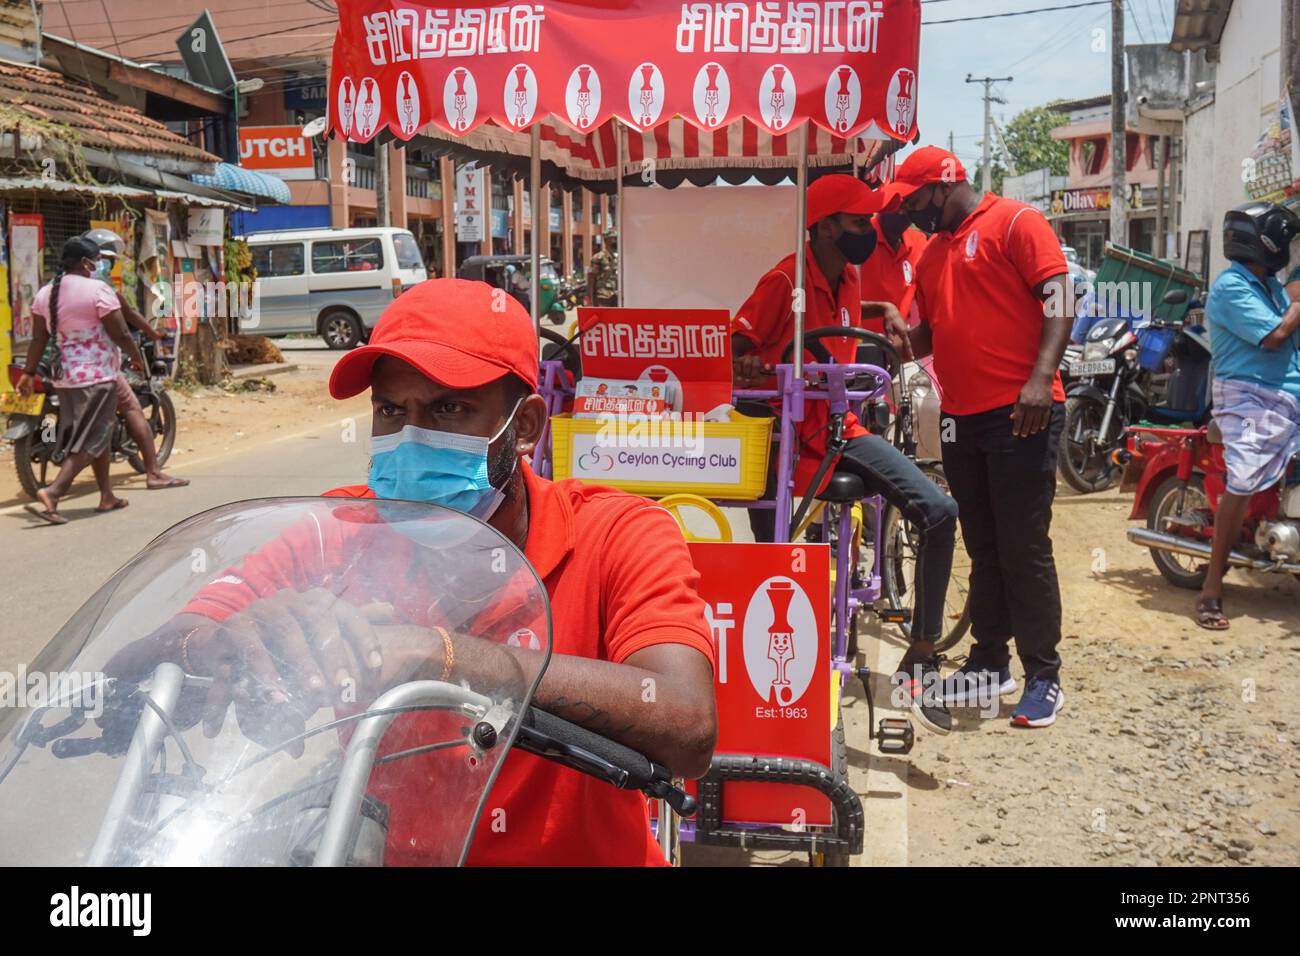 Ranjithraj Nishakaran advertises the magazine Siriththiran with a promotion team in Chavakachcheri, Jaffna, Sri Lanka on July 21, 2021. The magazine, which was relaunched in January 2021, was founded in 1963 and circulated for 32 years before its offices were burned down during the Sri Lankan Civil War. (Vijayatharsiny Thinesh/Global Press Journal) Stock Photo